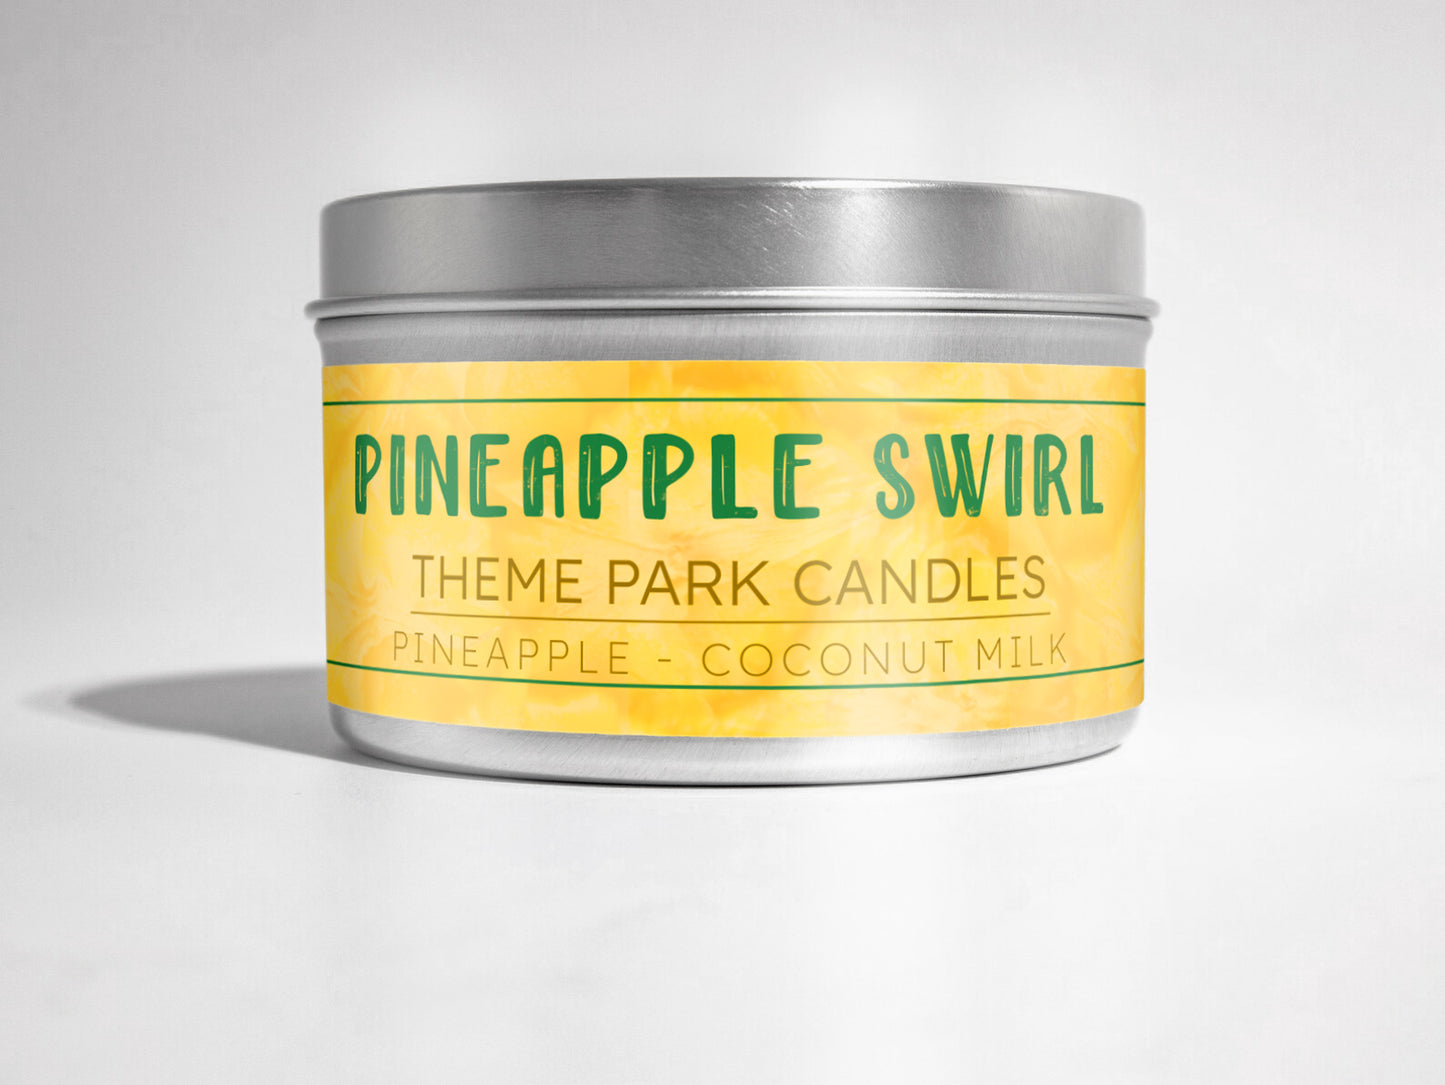 Pineapple Swirl Candle | Theme Park Candles